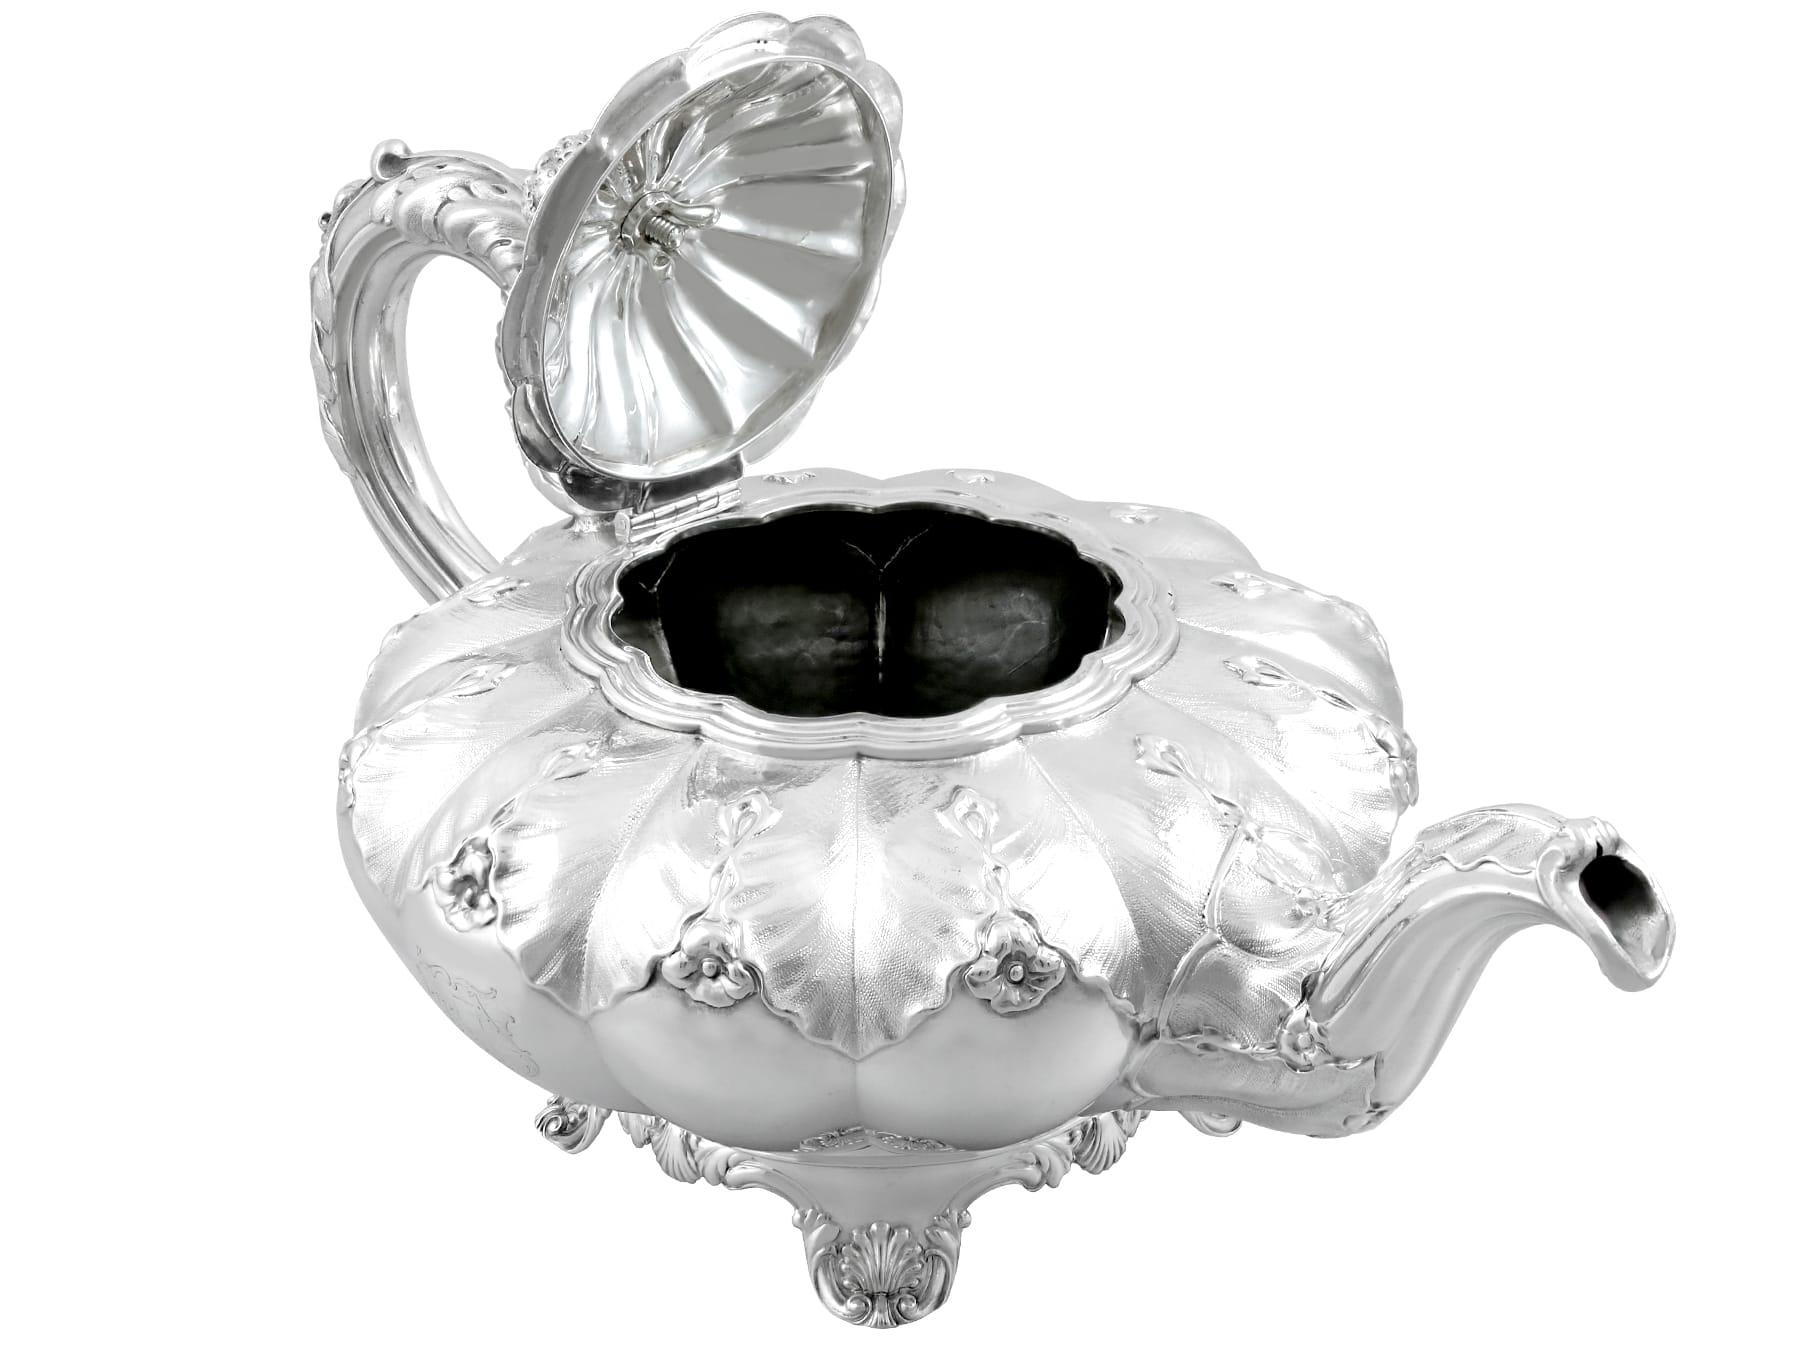 Antique Sterling Silver Teapot In Excellent Condition For Sale In Jesmond, Newcastle Upon Tyne